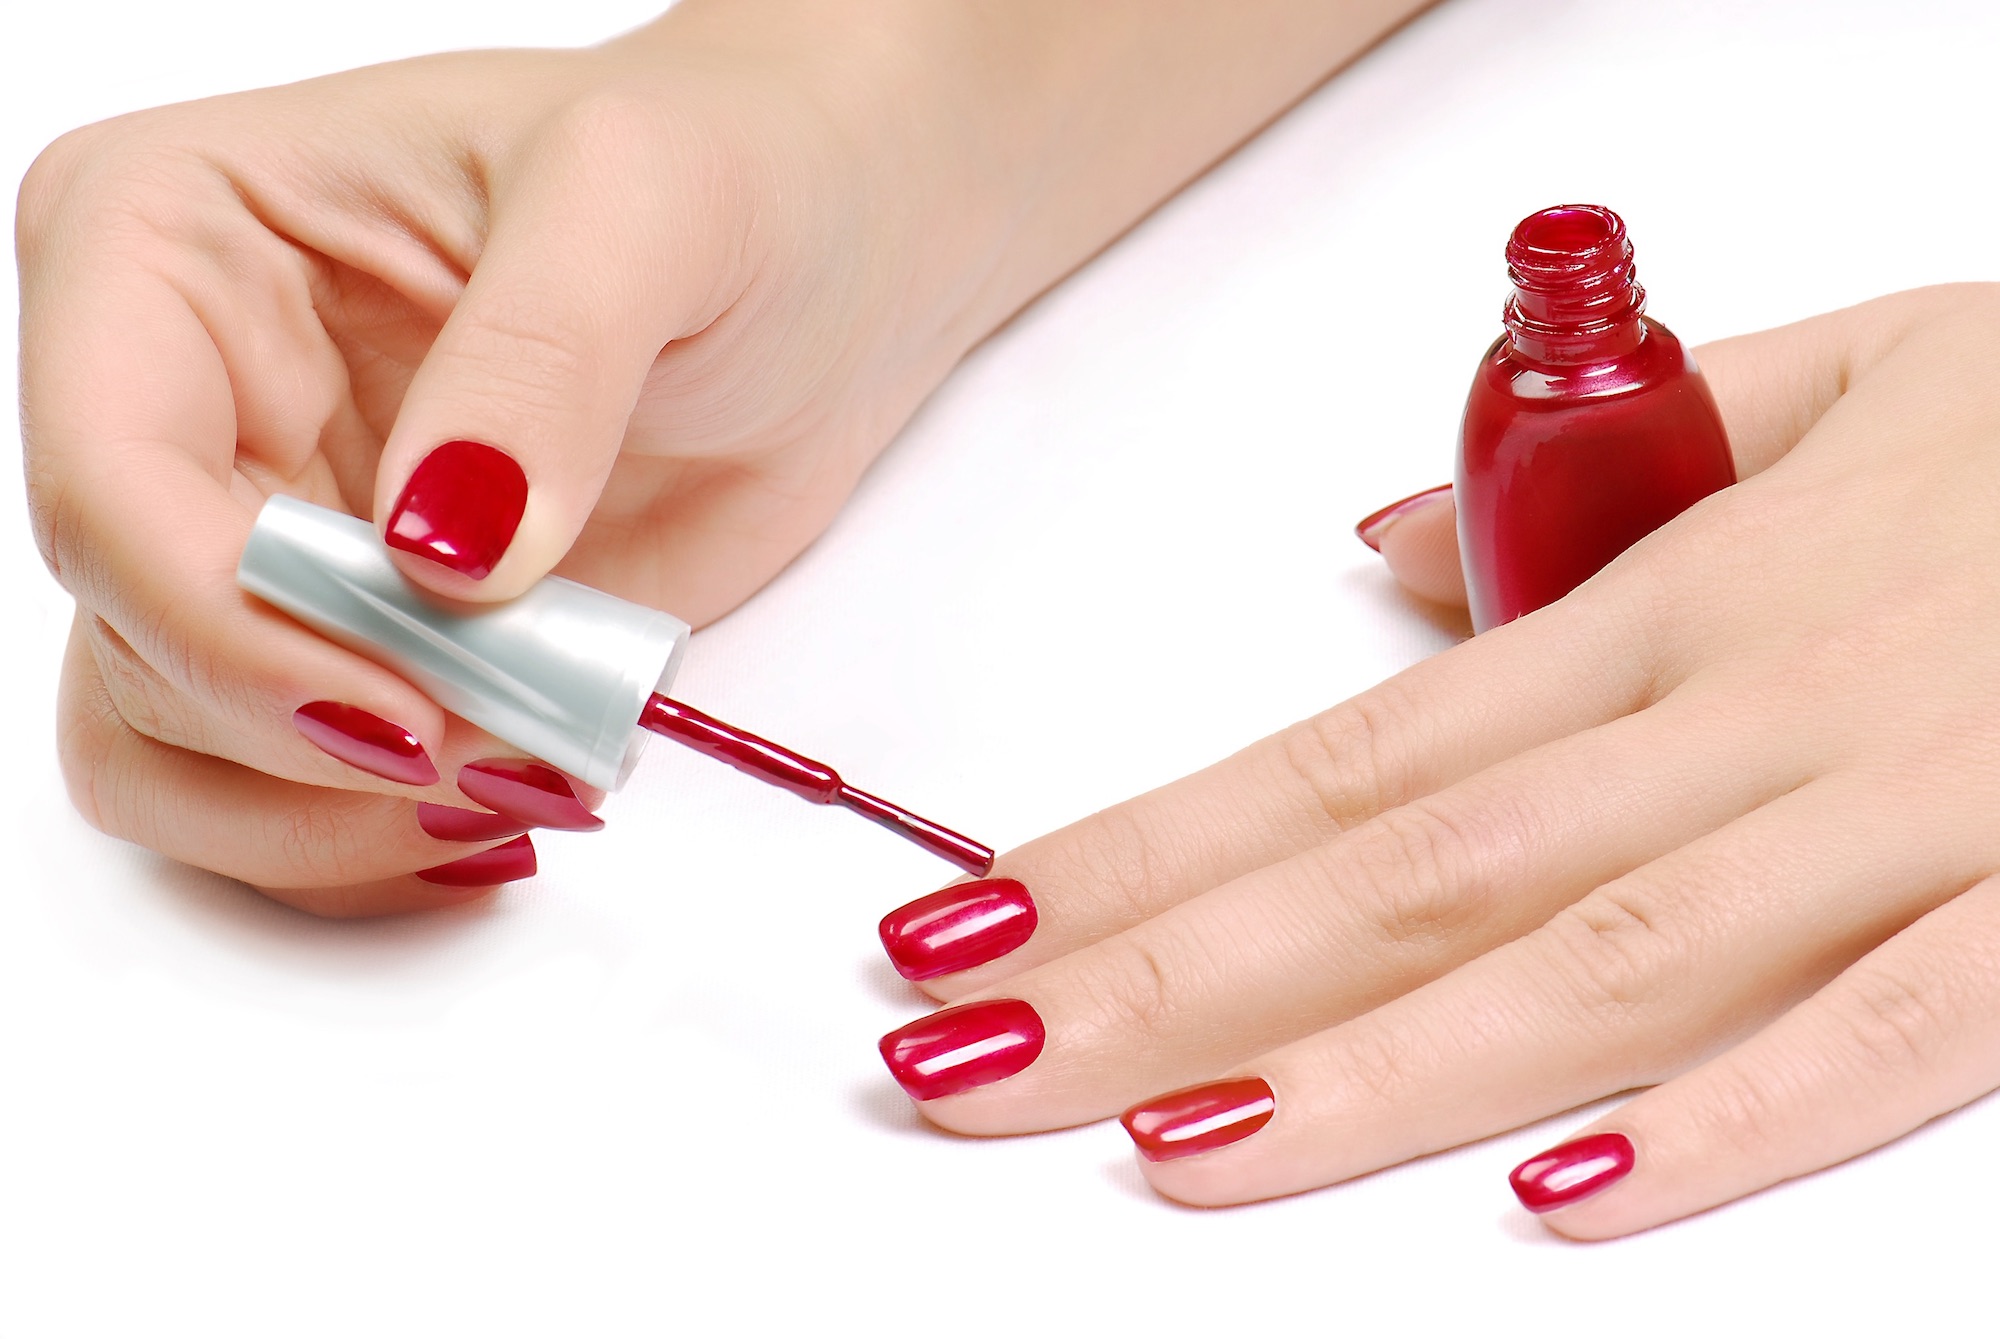 9. "Consider using a nail polish with a slimming effect, such as a color-correcting formula" - wide 4